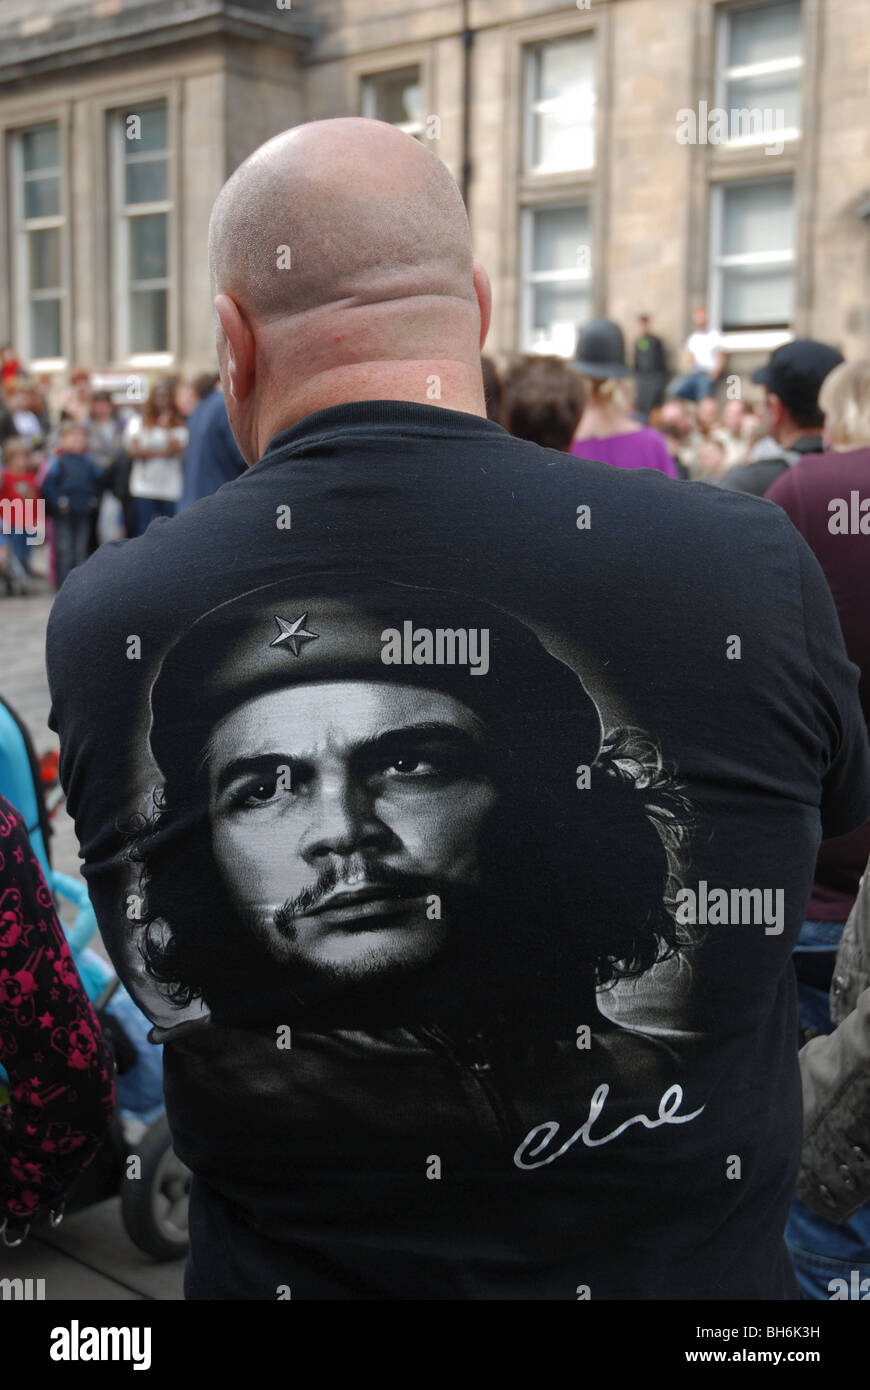 The back view of a bald man wearing a Che Guevara t-shirt Stock Photo